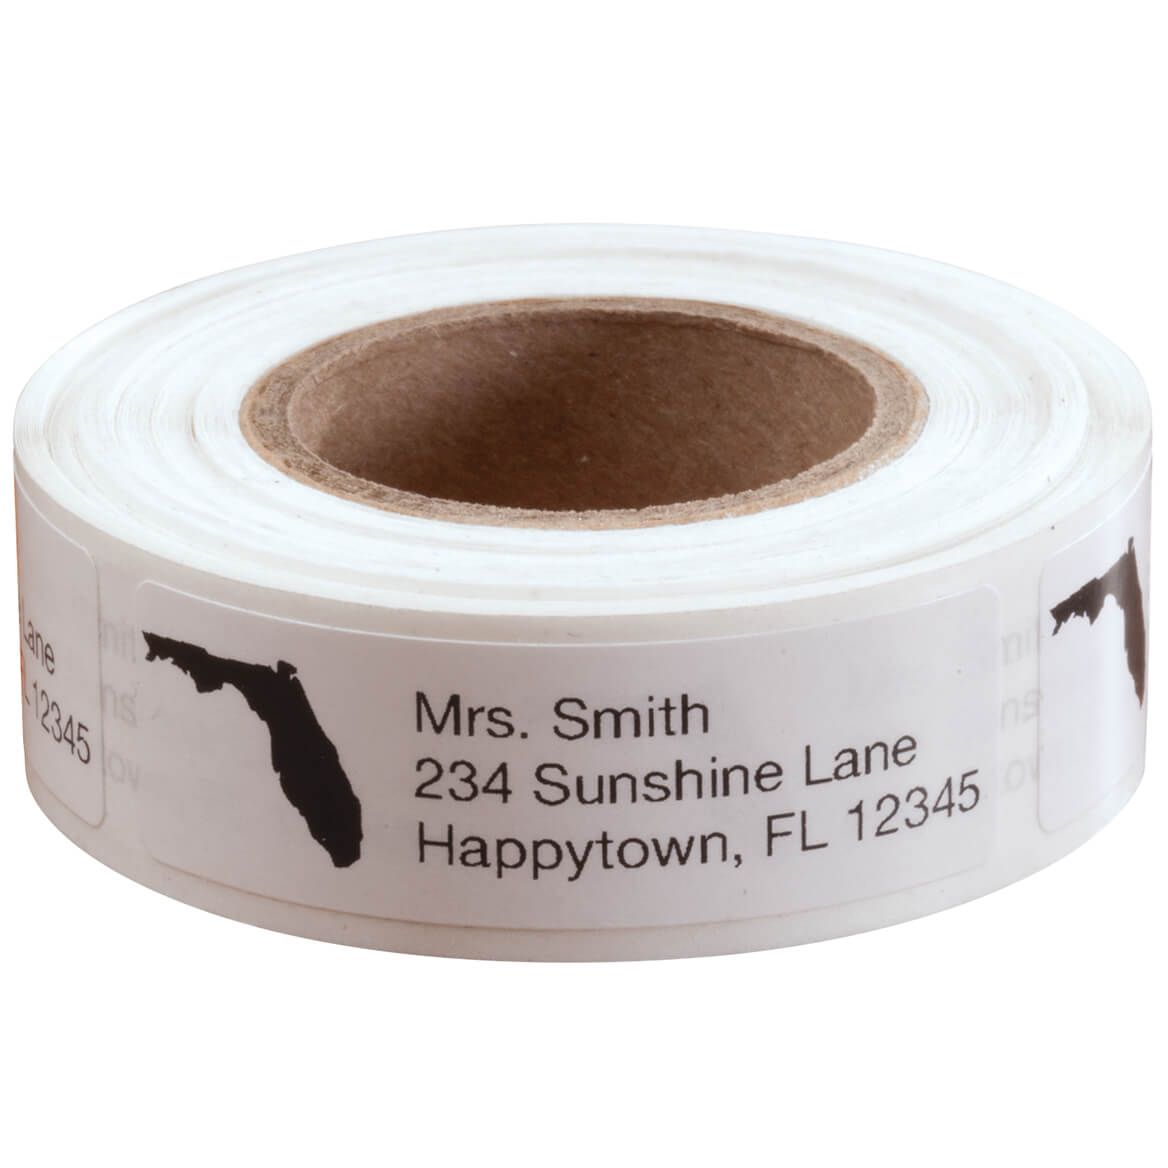 State Silhouette Personalized Address Labels - Roll of 200 + '-' + 352754